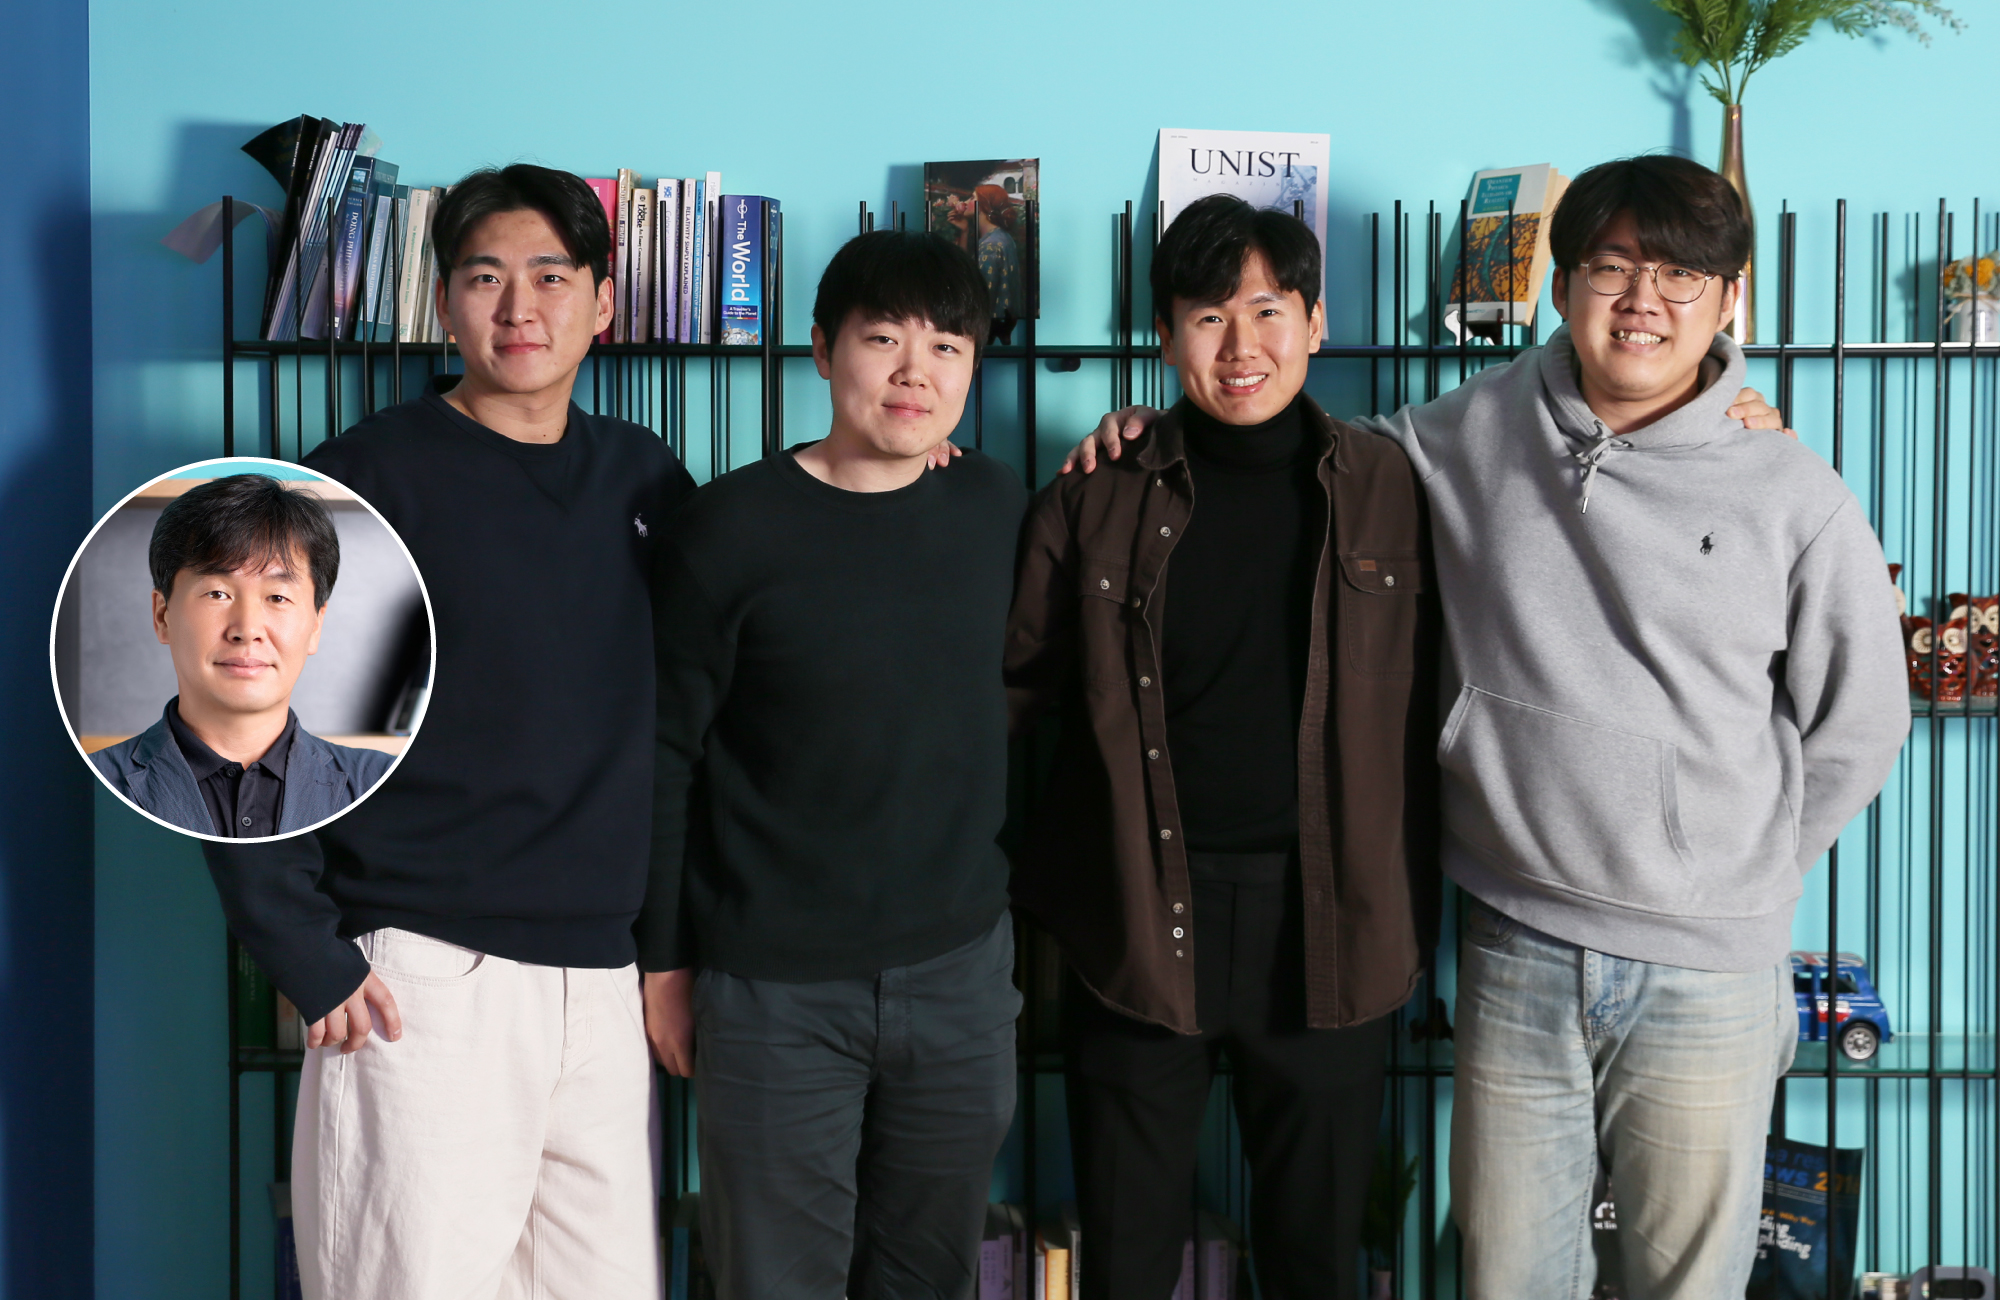 Professor Jae Joon Kim (Inside the circle) and his research team, including YouJang Pyeon (Second from the right). 